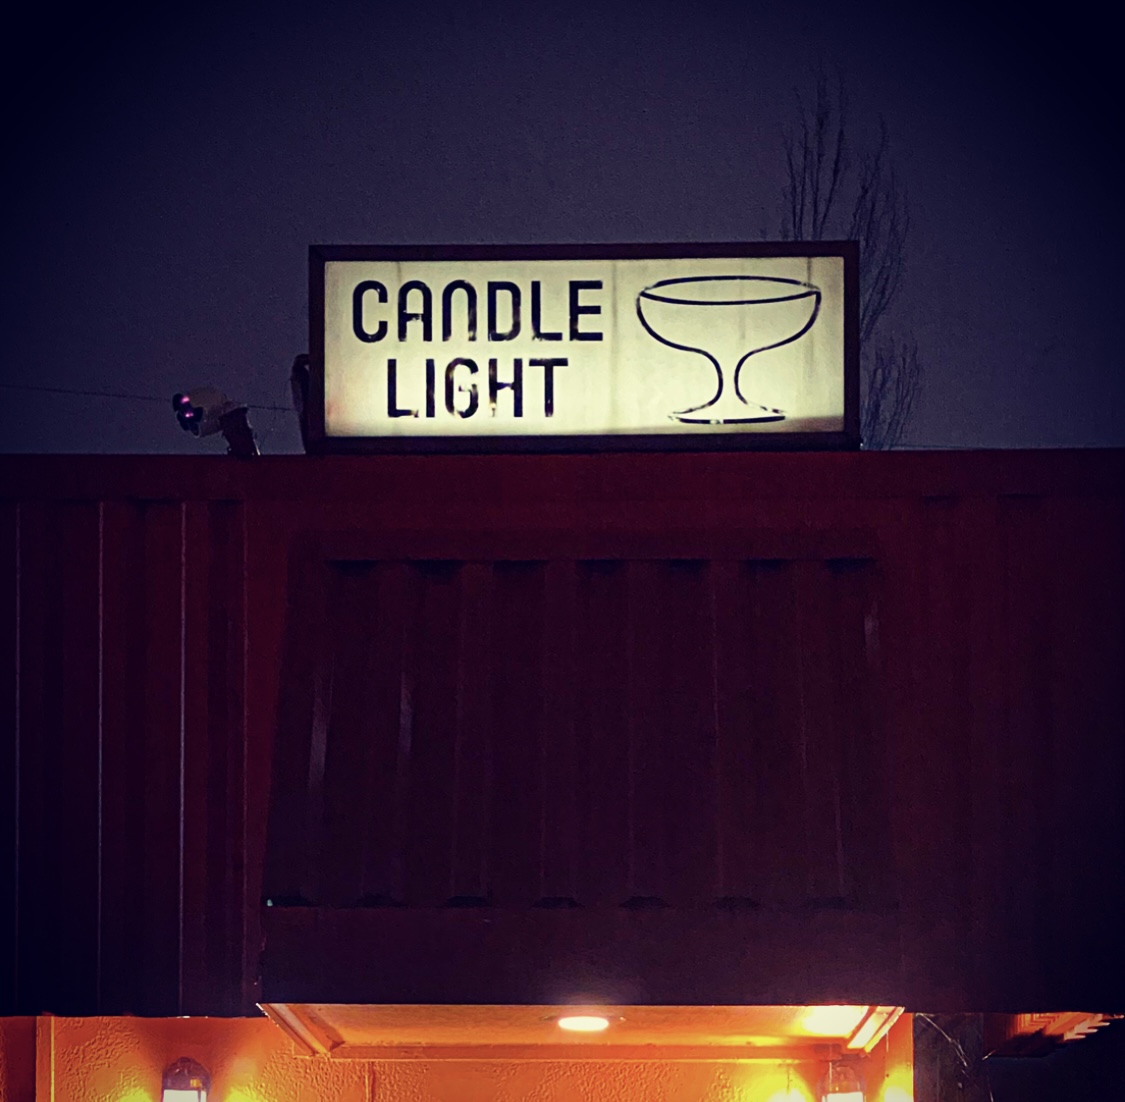 The Candlelight Restaurant and Lounge Portland Dive Bars Photos by Steven Shomler